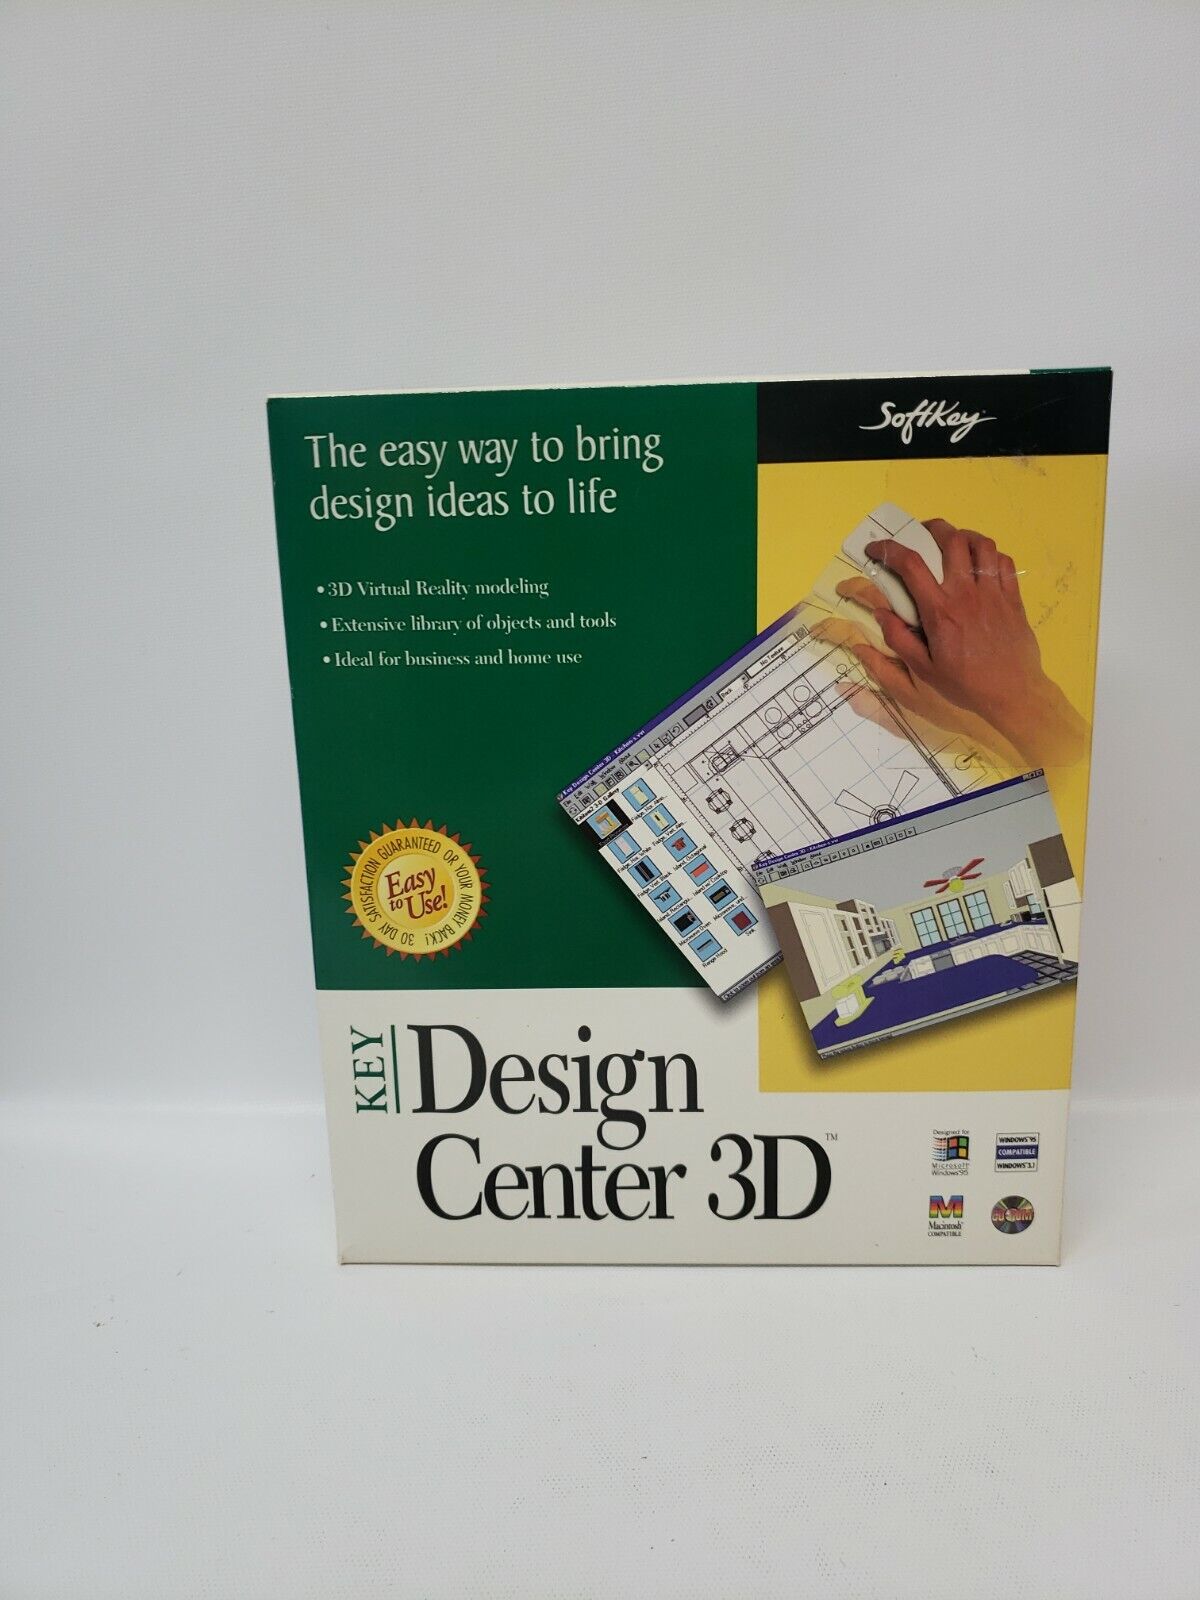 Design Center Software Windows 95 Softkey Key 3-D CD-ROM With Manuals 